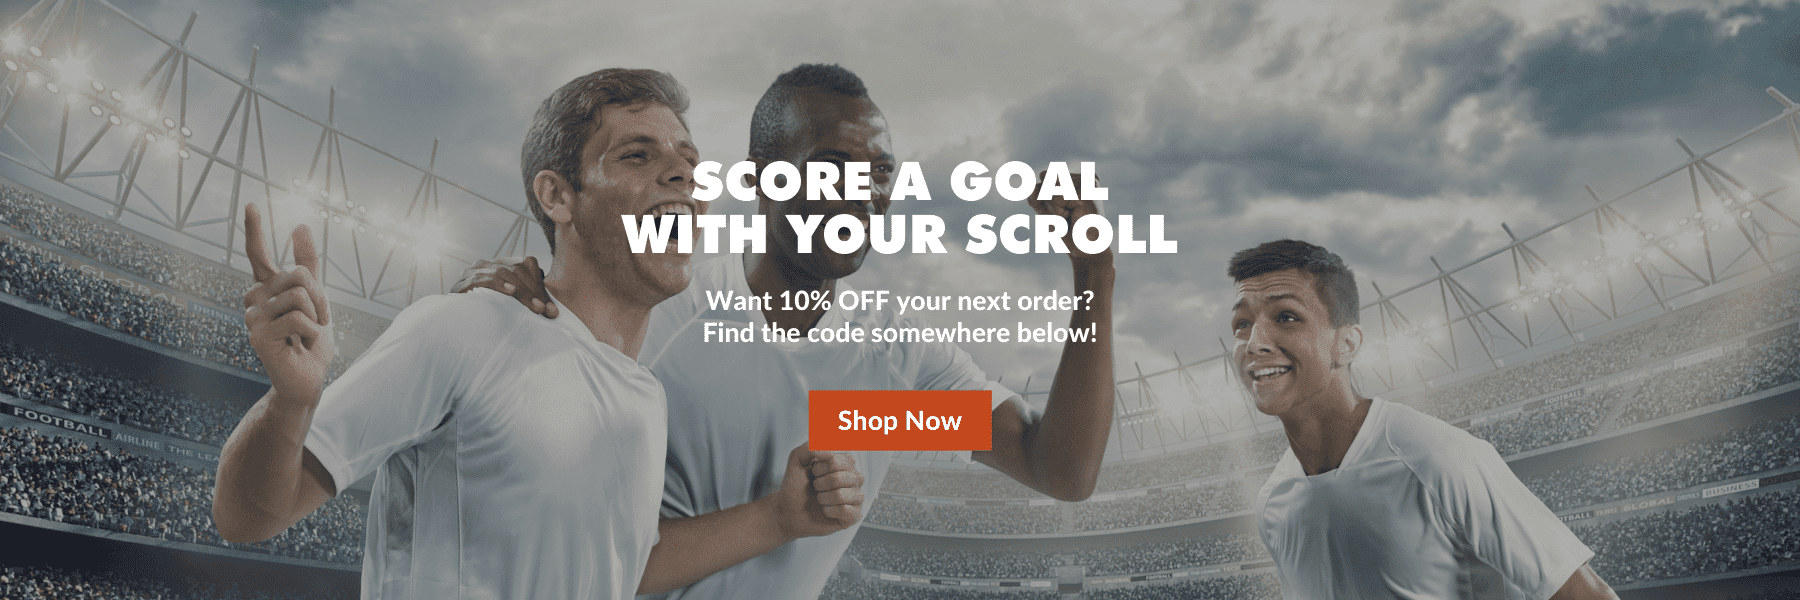 slide-5-score-goal-with-scroll-10-percent-off-next-order-personalised-footb